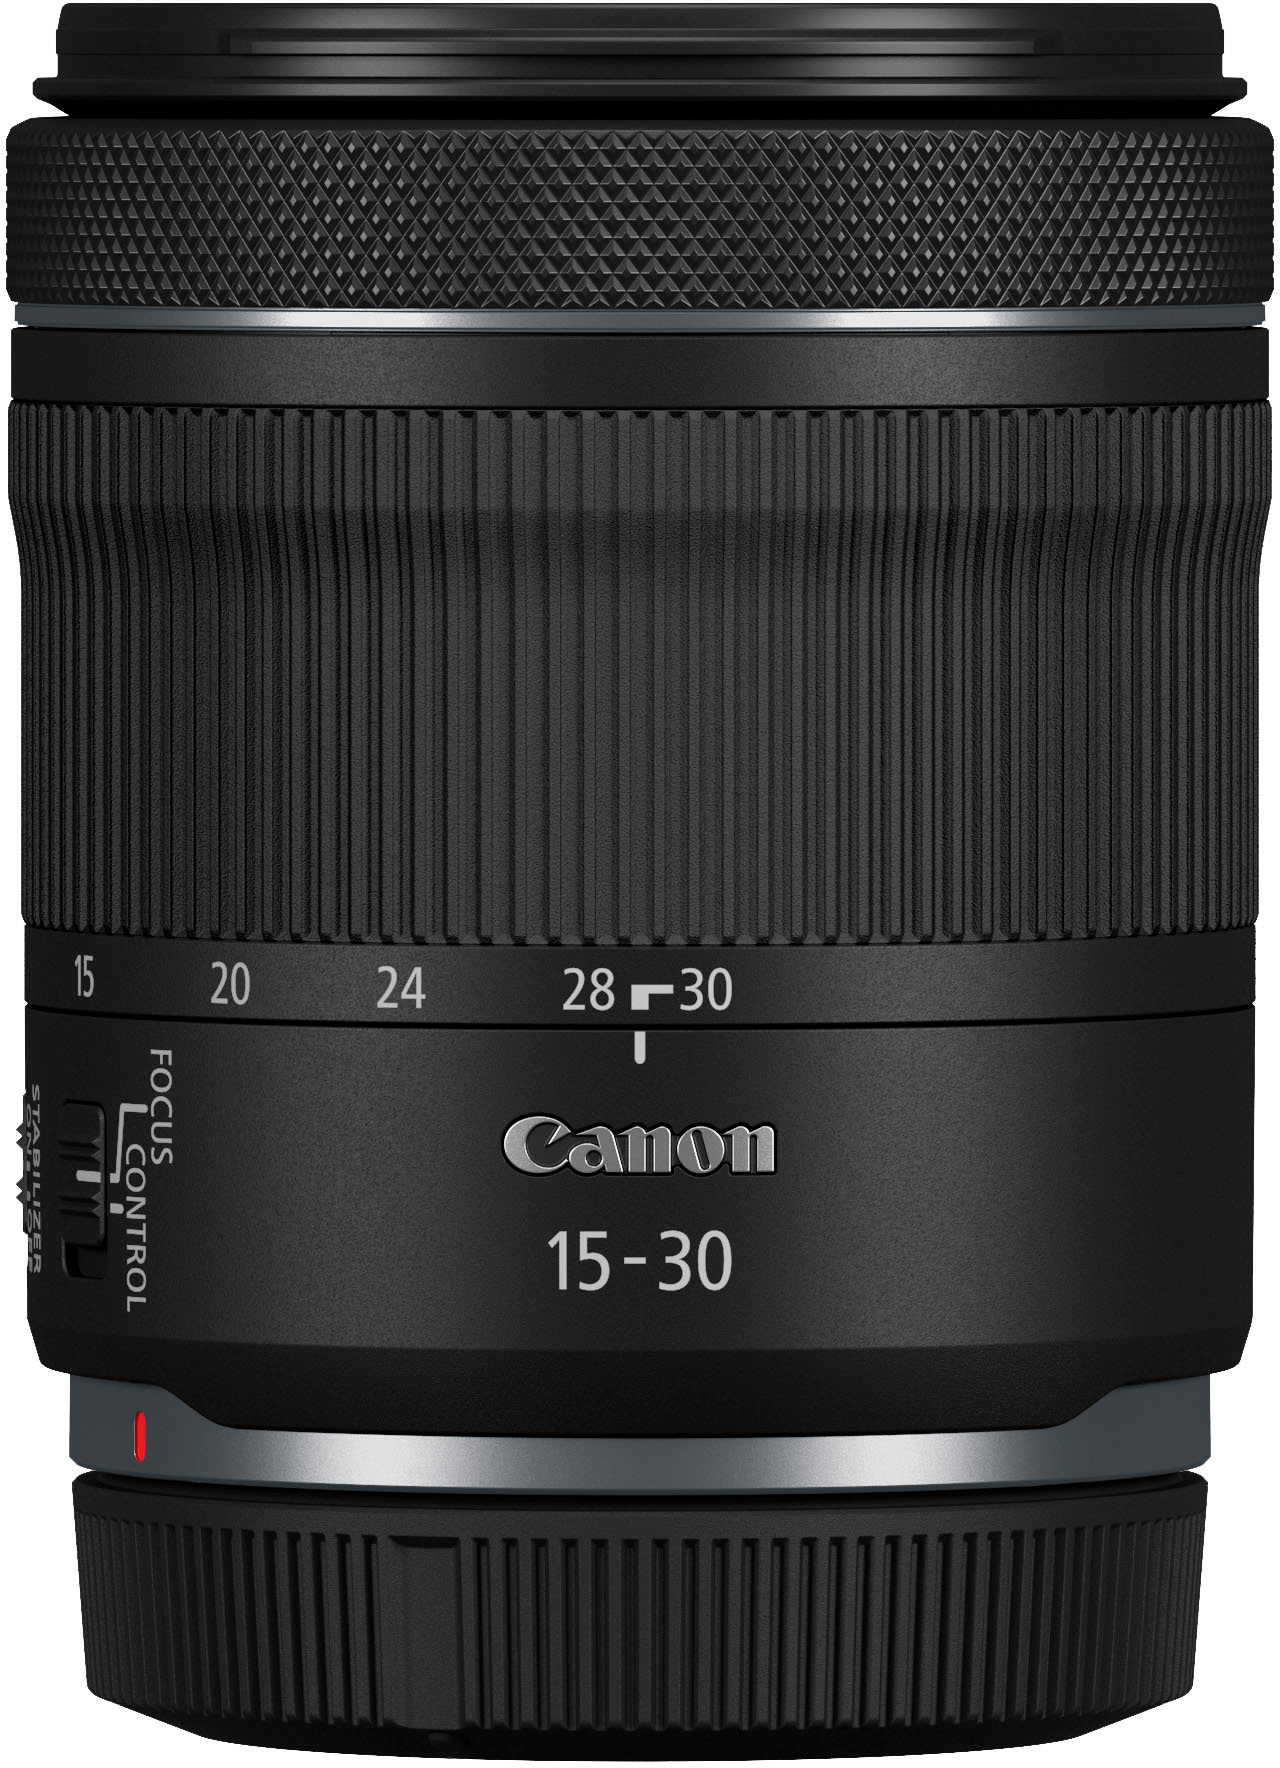 Angle View: Canon - RF 15-30mm F4.5-6.3 IS STM Ultra-Wide Angle Zoom Lens for EOS R-Series Cameras - Black